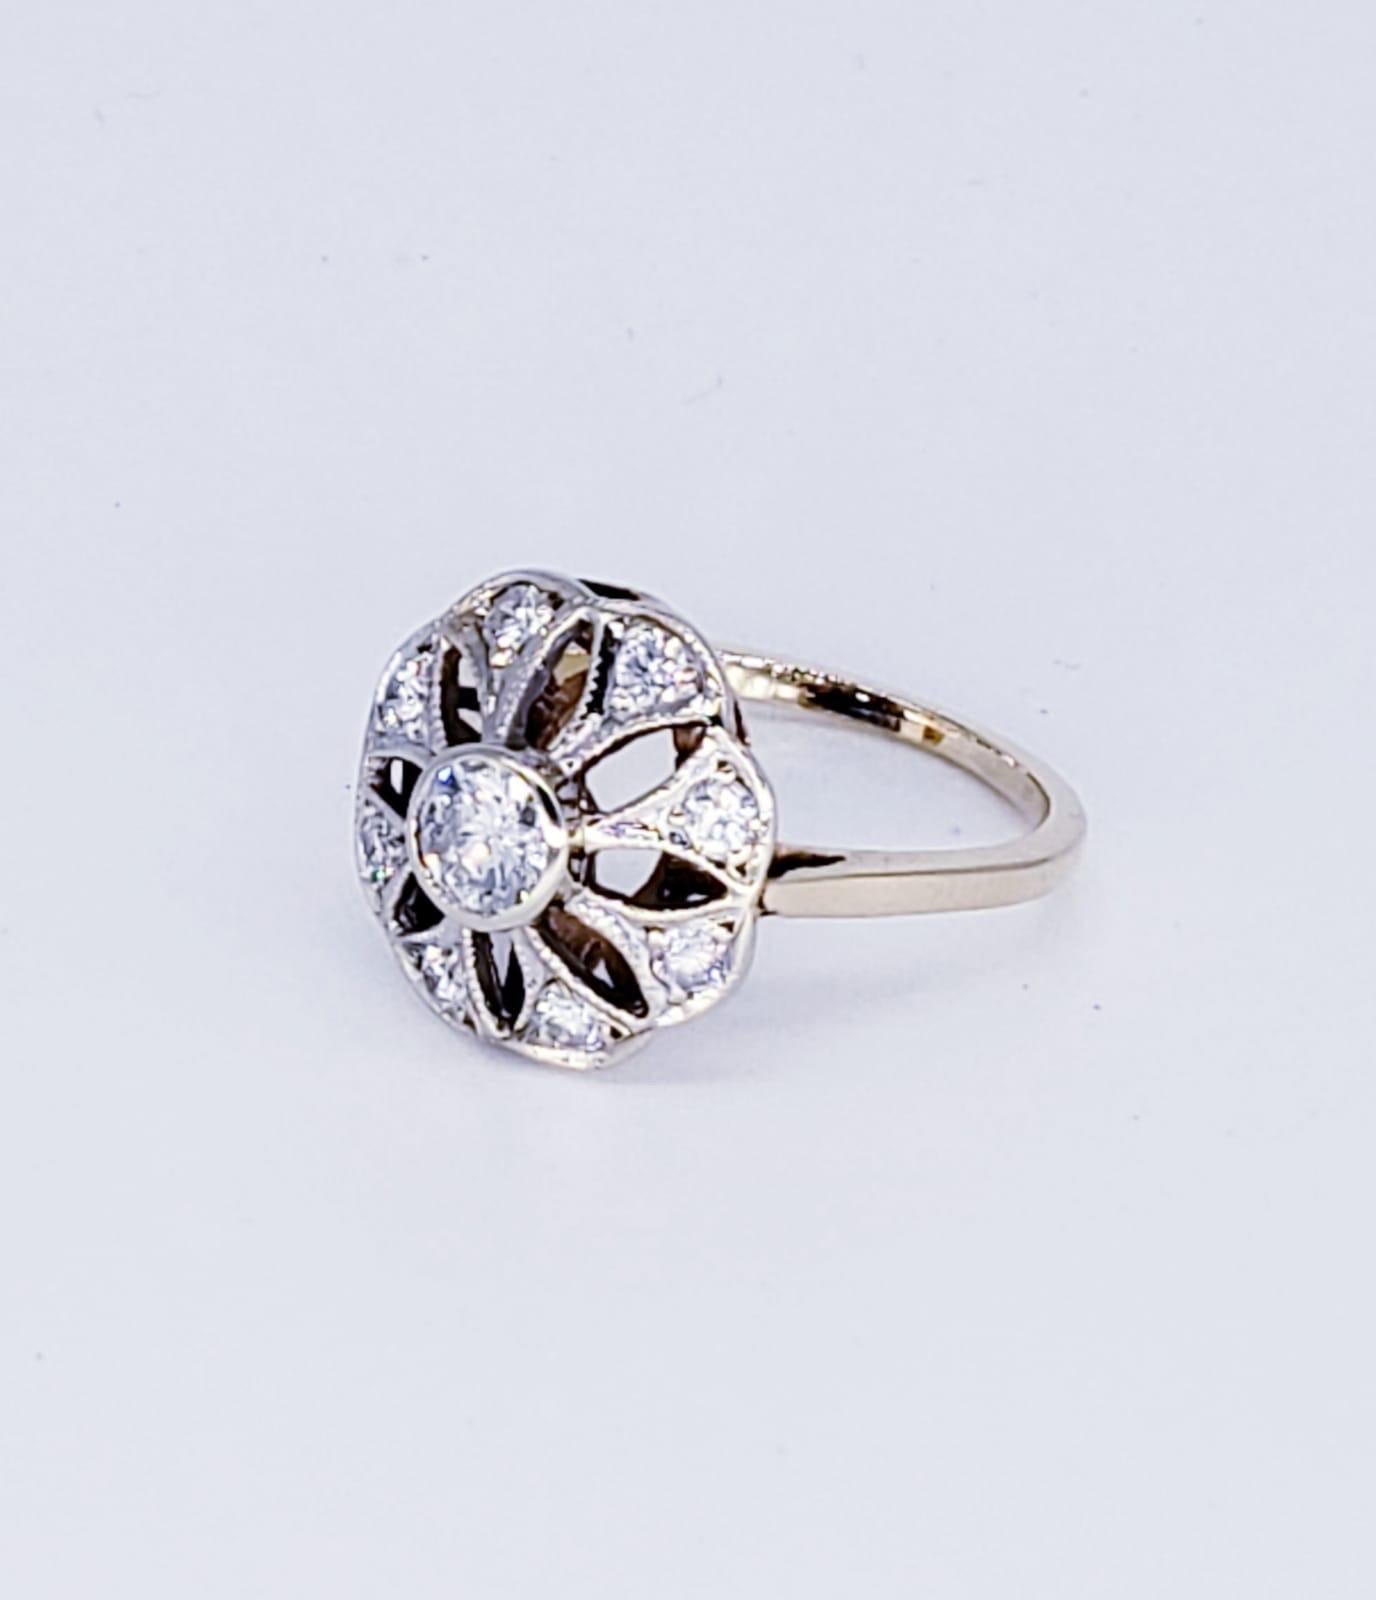 Art Deco Style 0.76 Carat Diamond Cocktail Ring. Center diamond is approx 0.36ct & surrounding diamonds weight a total of 0.40ct (8 stones 0.05ct each). The ring is a size 6.25 & weights 3.4 grams 14k solid gold. The height of the ring measures